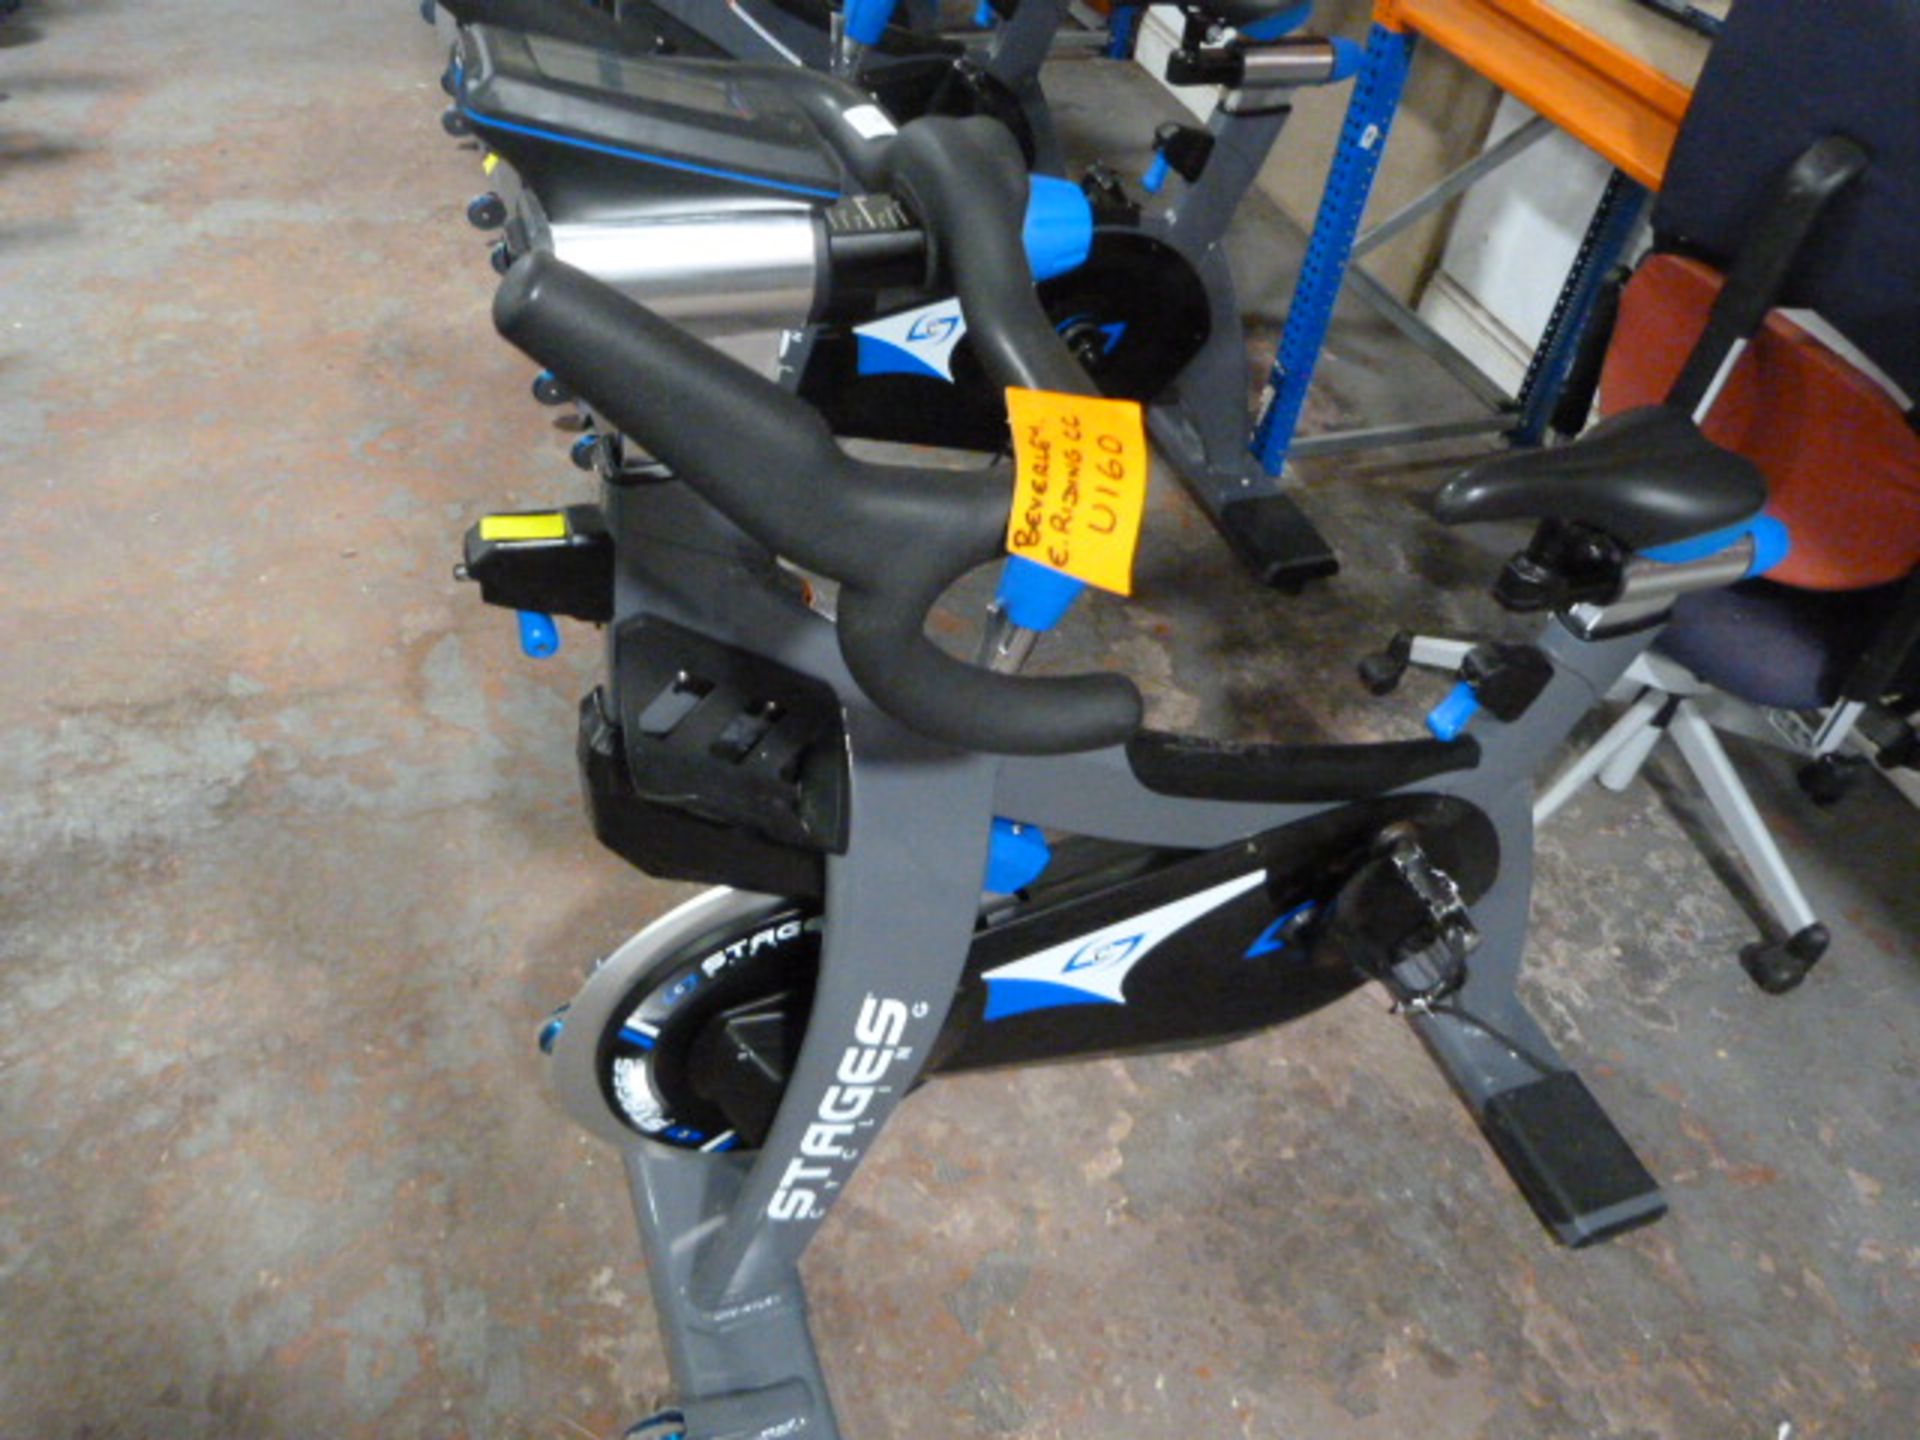 *Stages Cycling SC3 Exercise Bike - Image 3 of 3